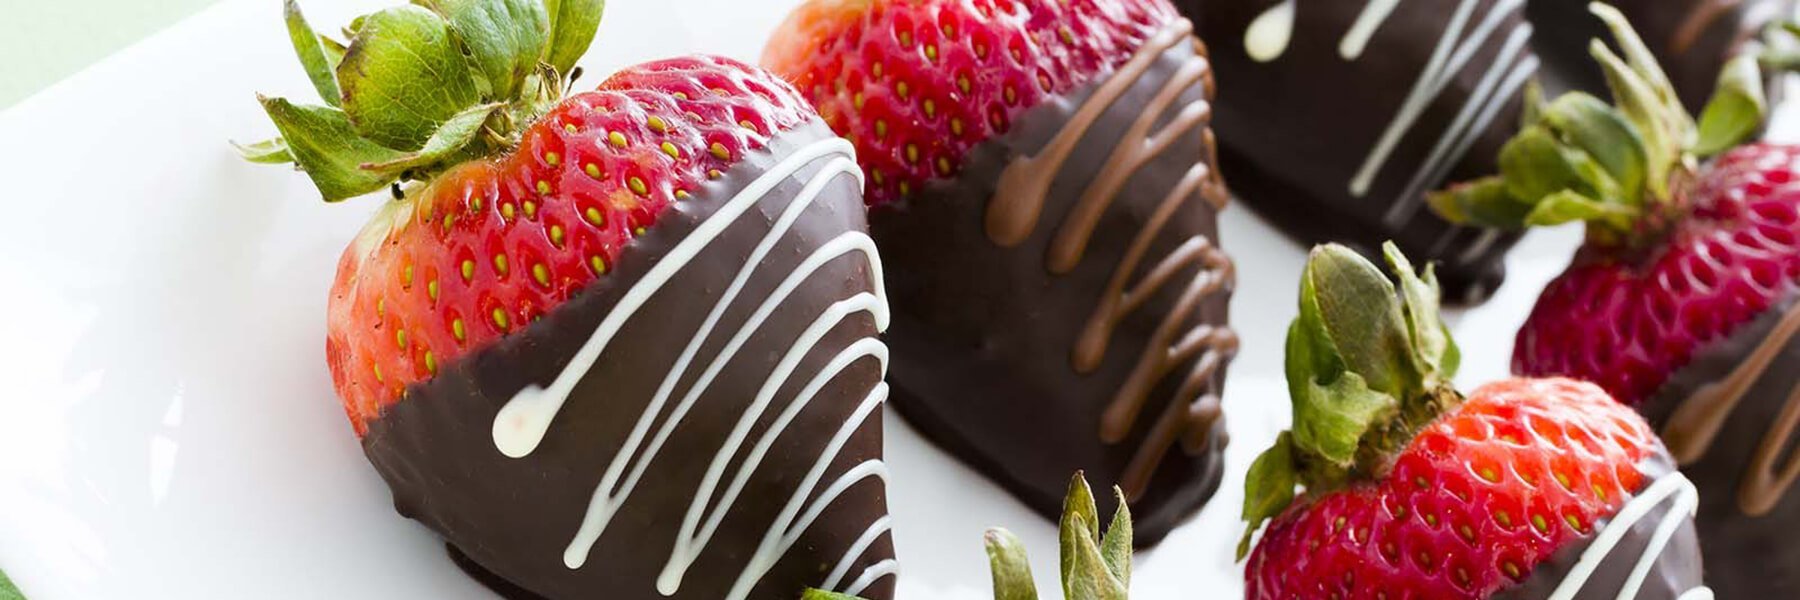 Chocolate Covered Strawberries & Fruit Gifts